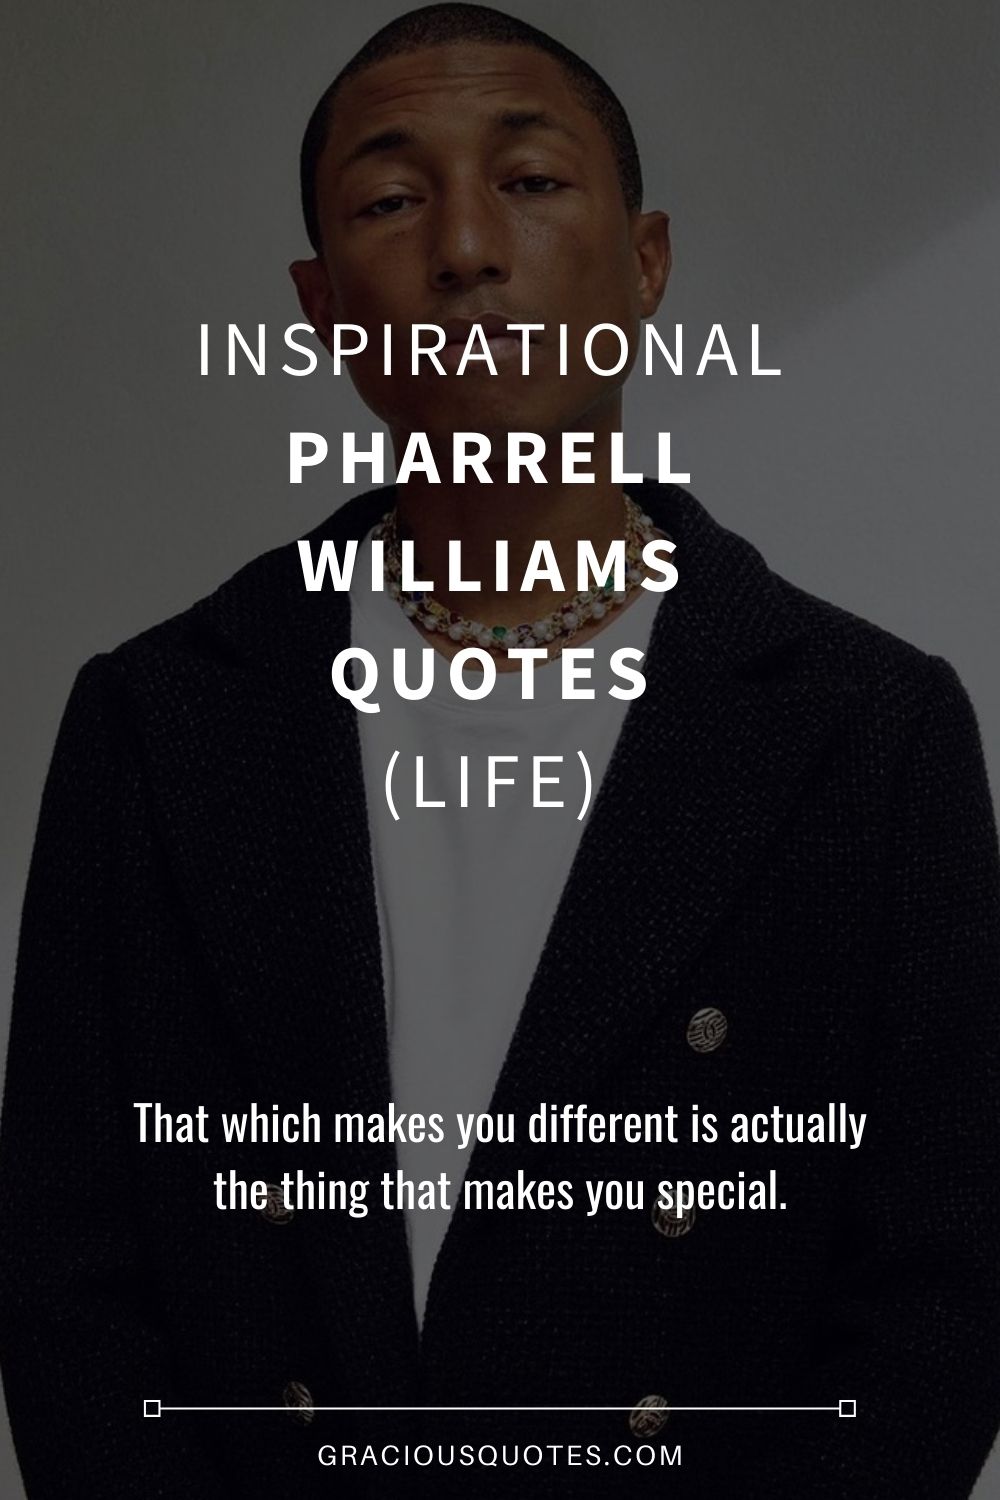 7 Quotes About Pharrell Williams